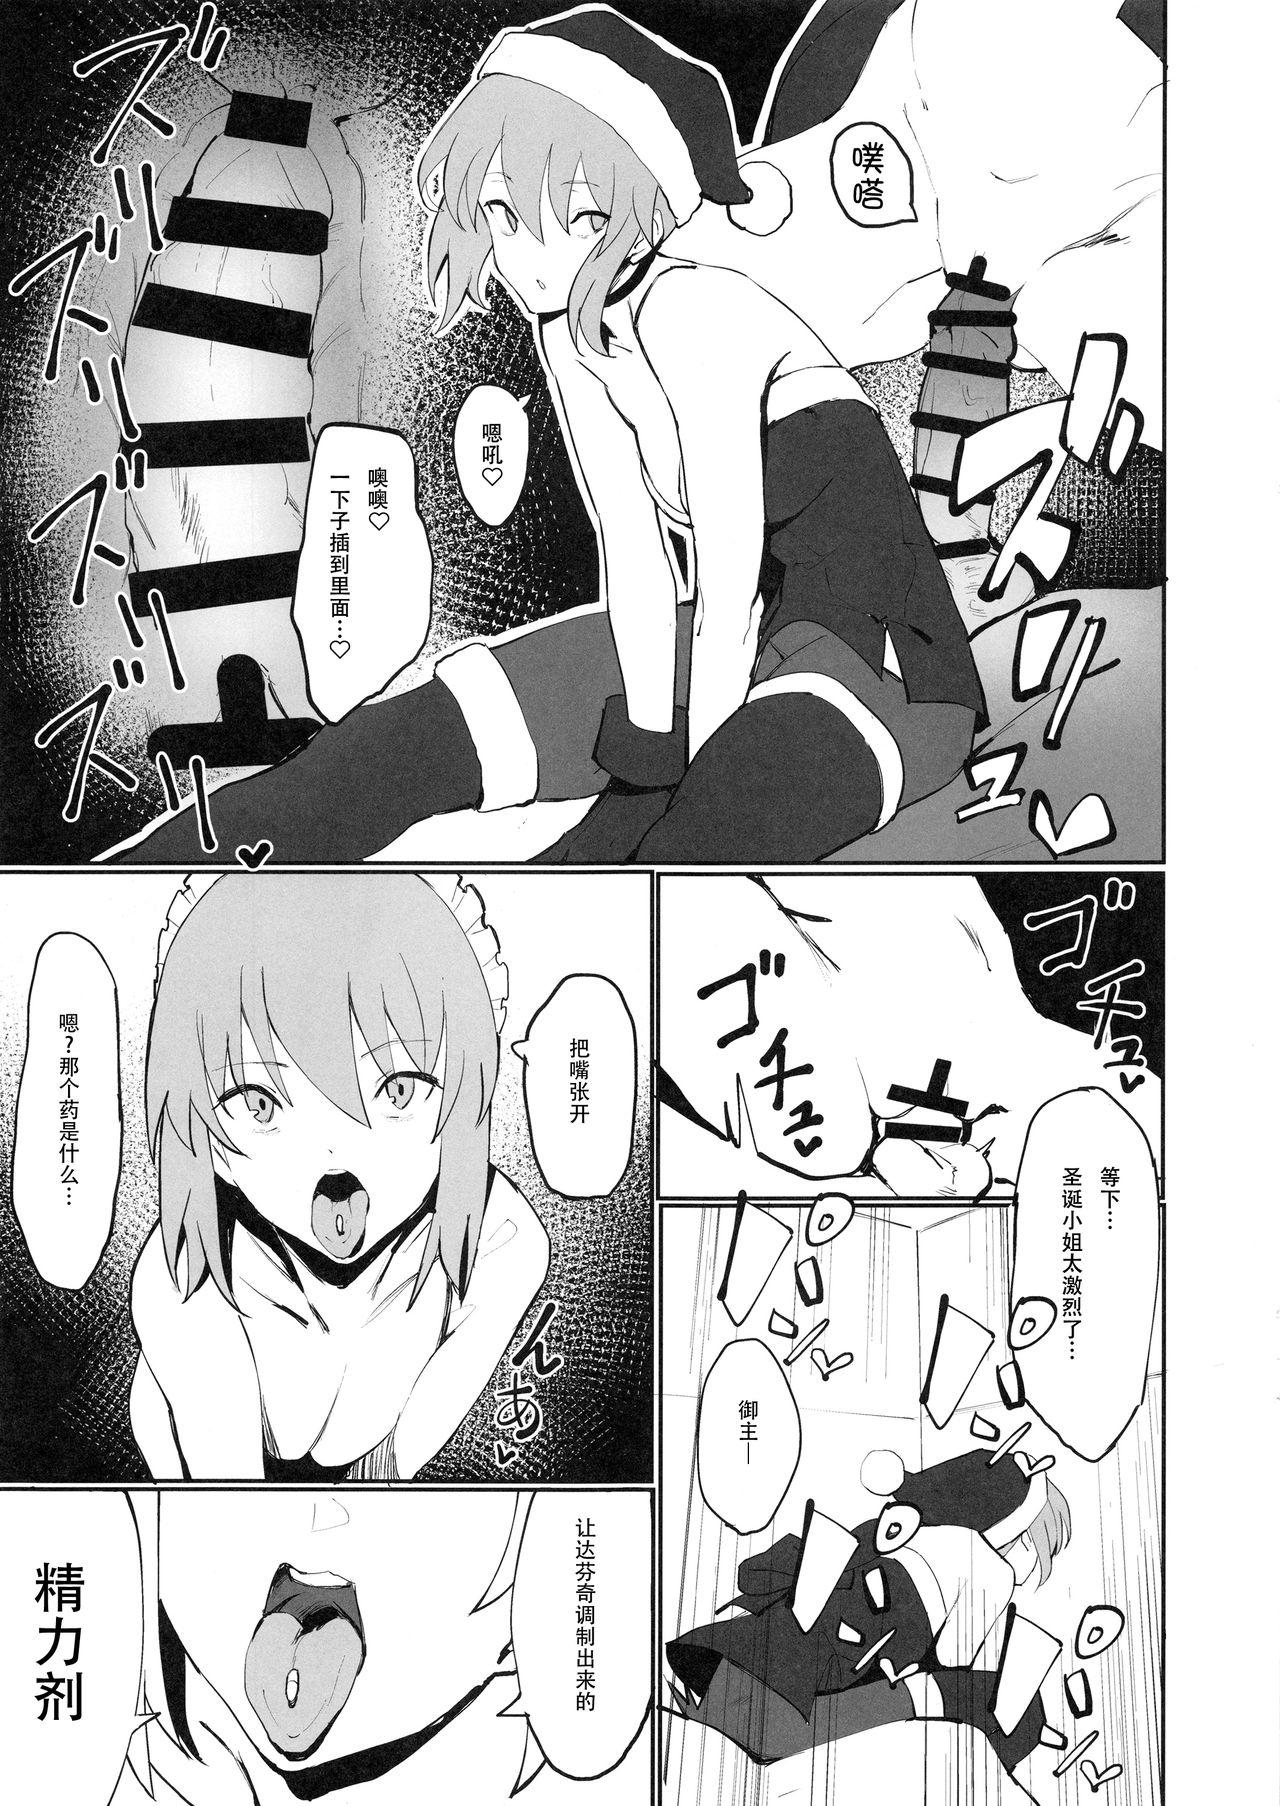 Women Sucking Dick Saber Alter to Maryoku Kyoukyuu | 和saber alter的魔力供给♡ - Fate grand order Making Love Porn - Page 10